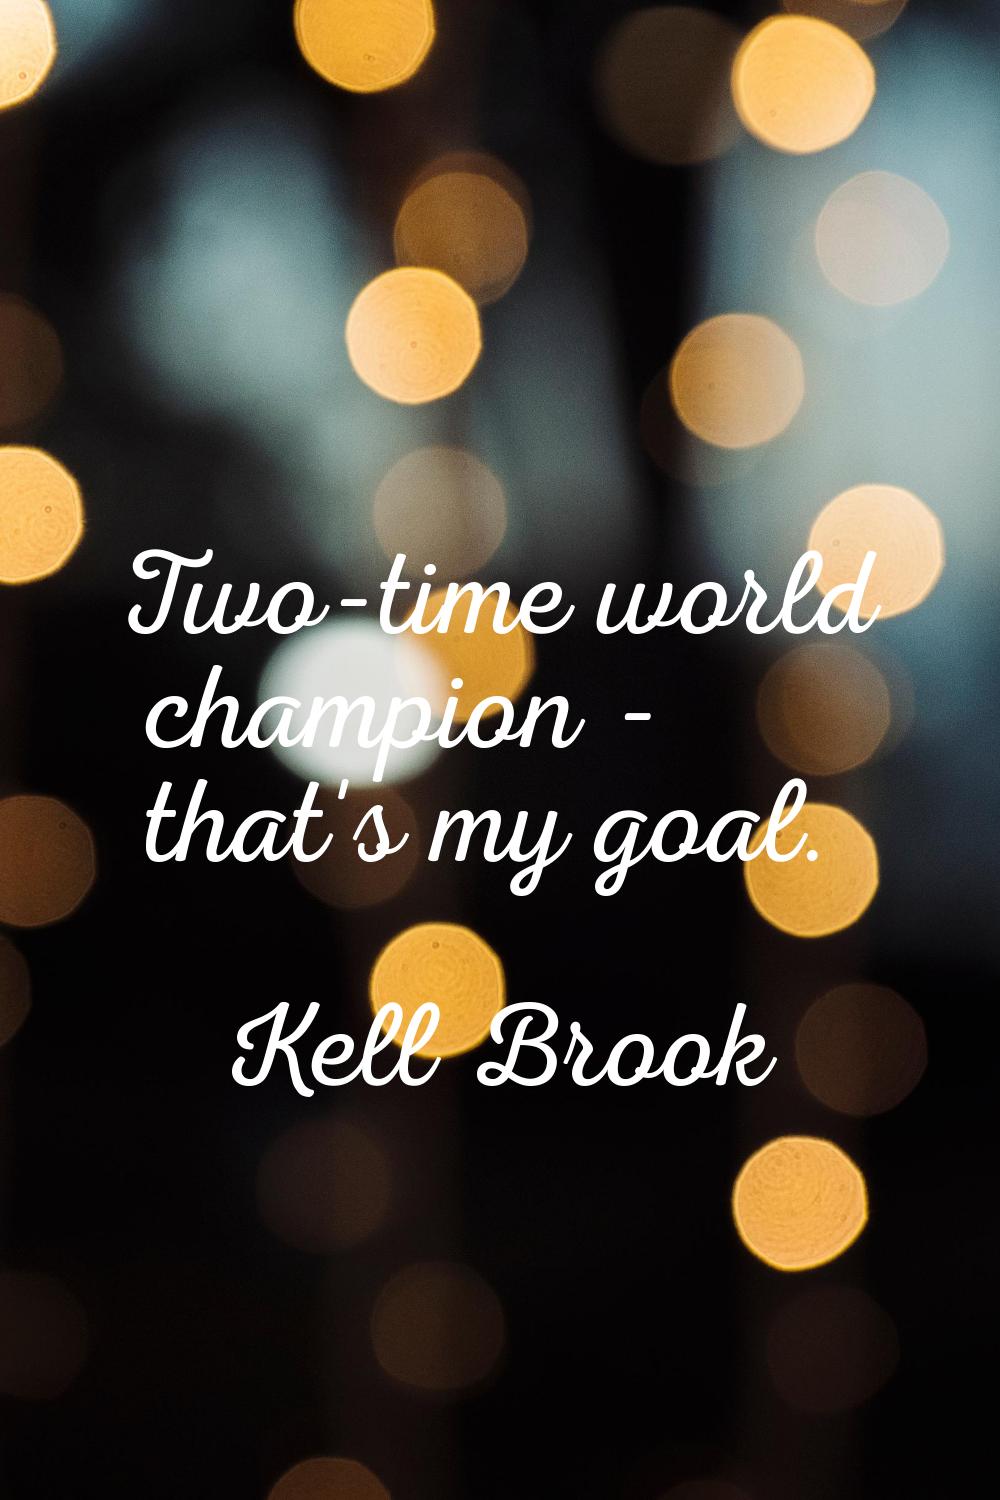 Two-time world champion - that's my goal.